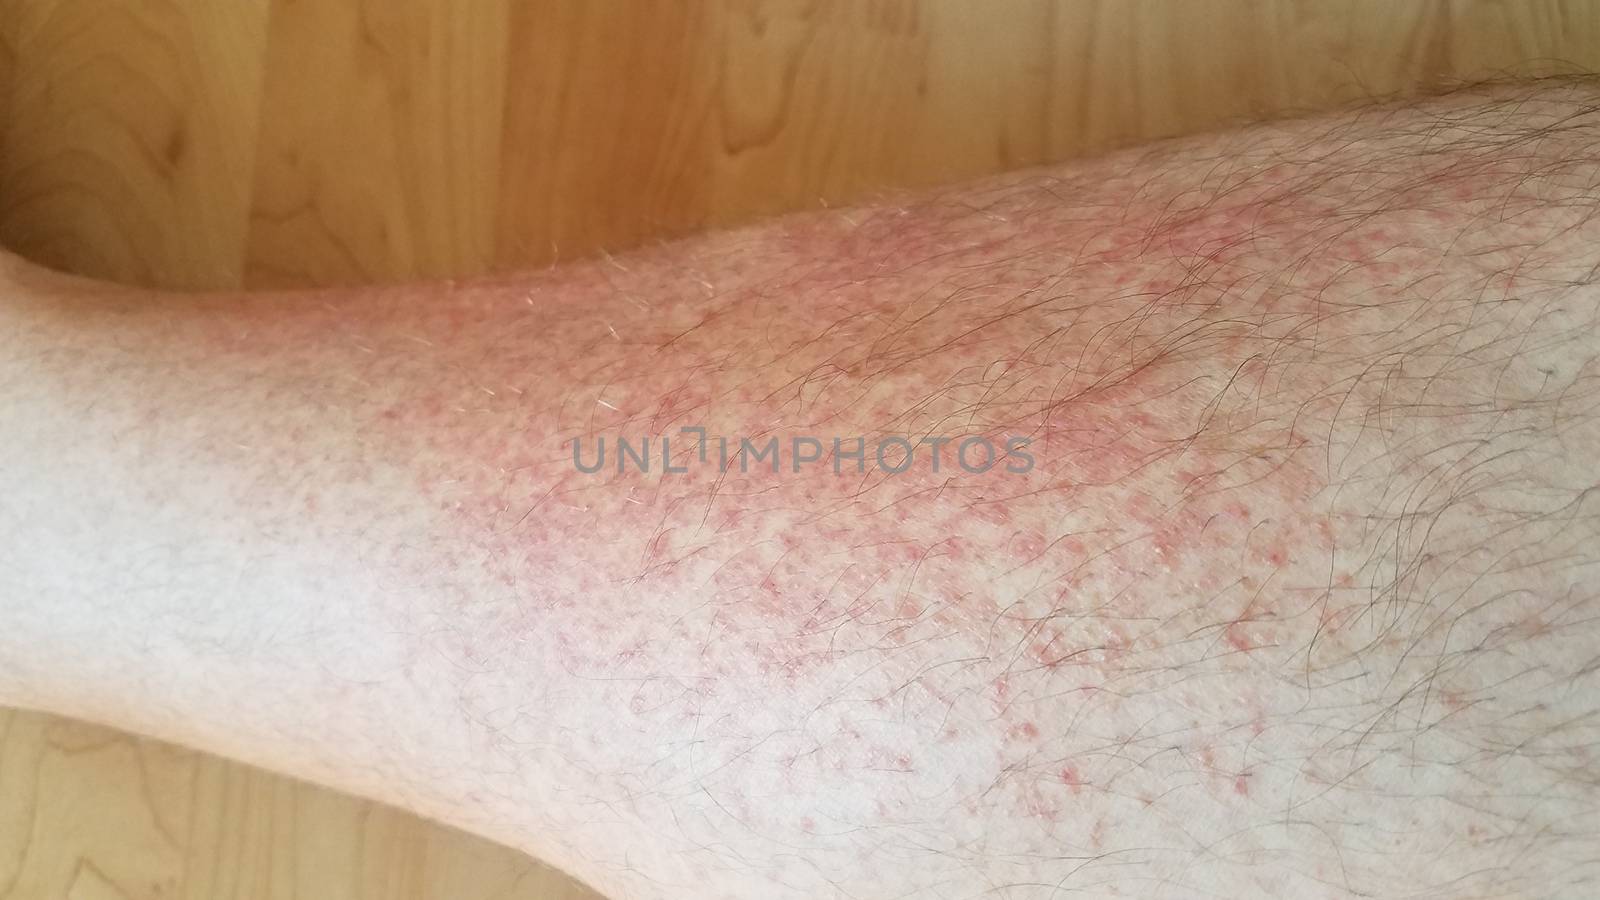 red rash or inflammation on male leg by stockphotofan1